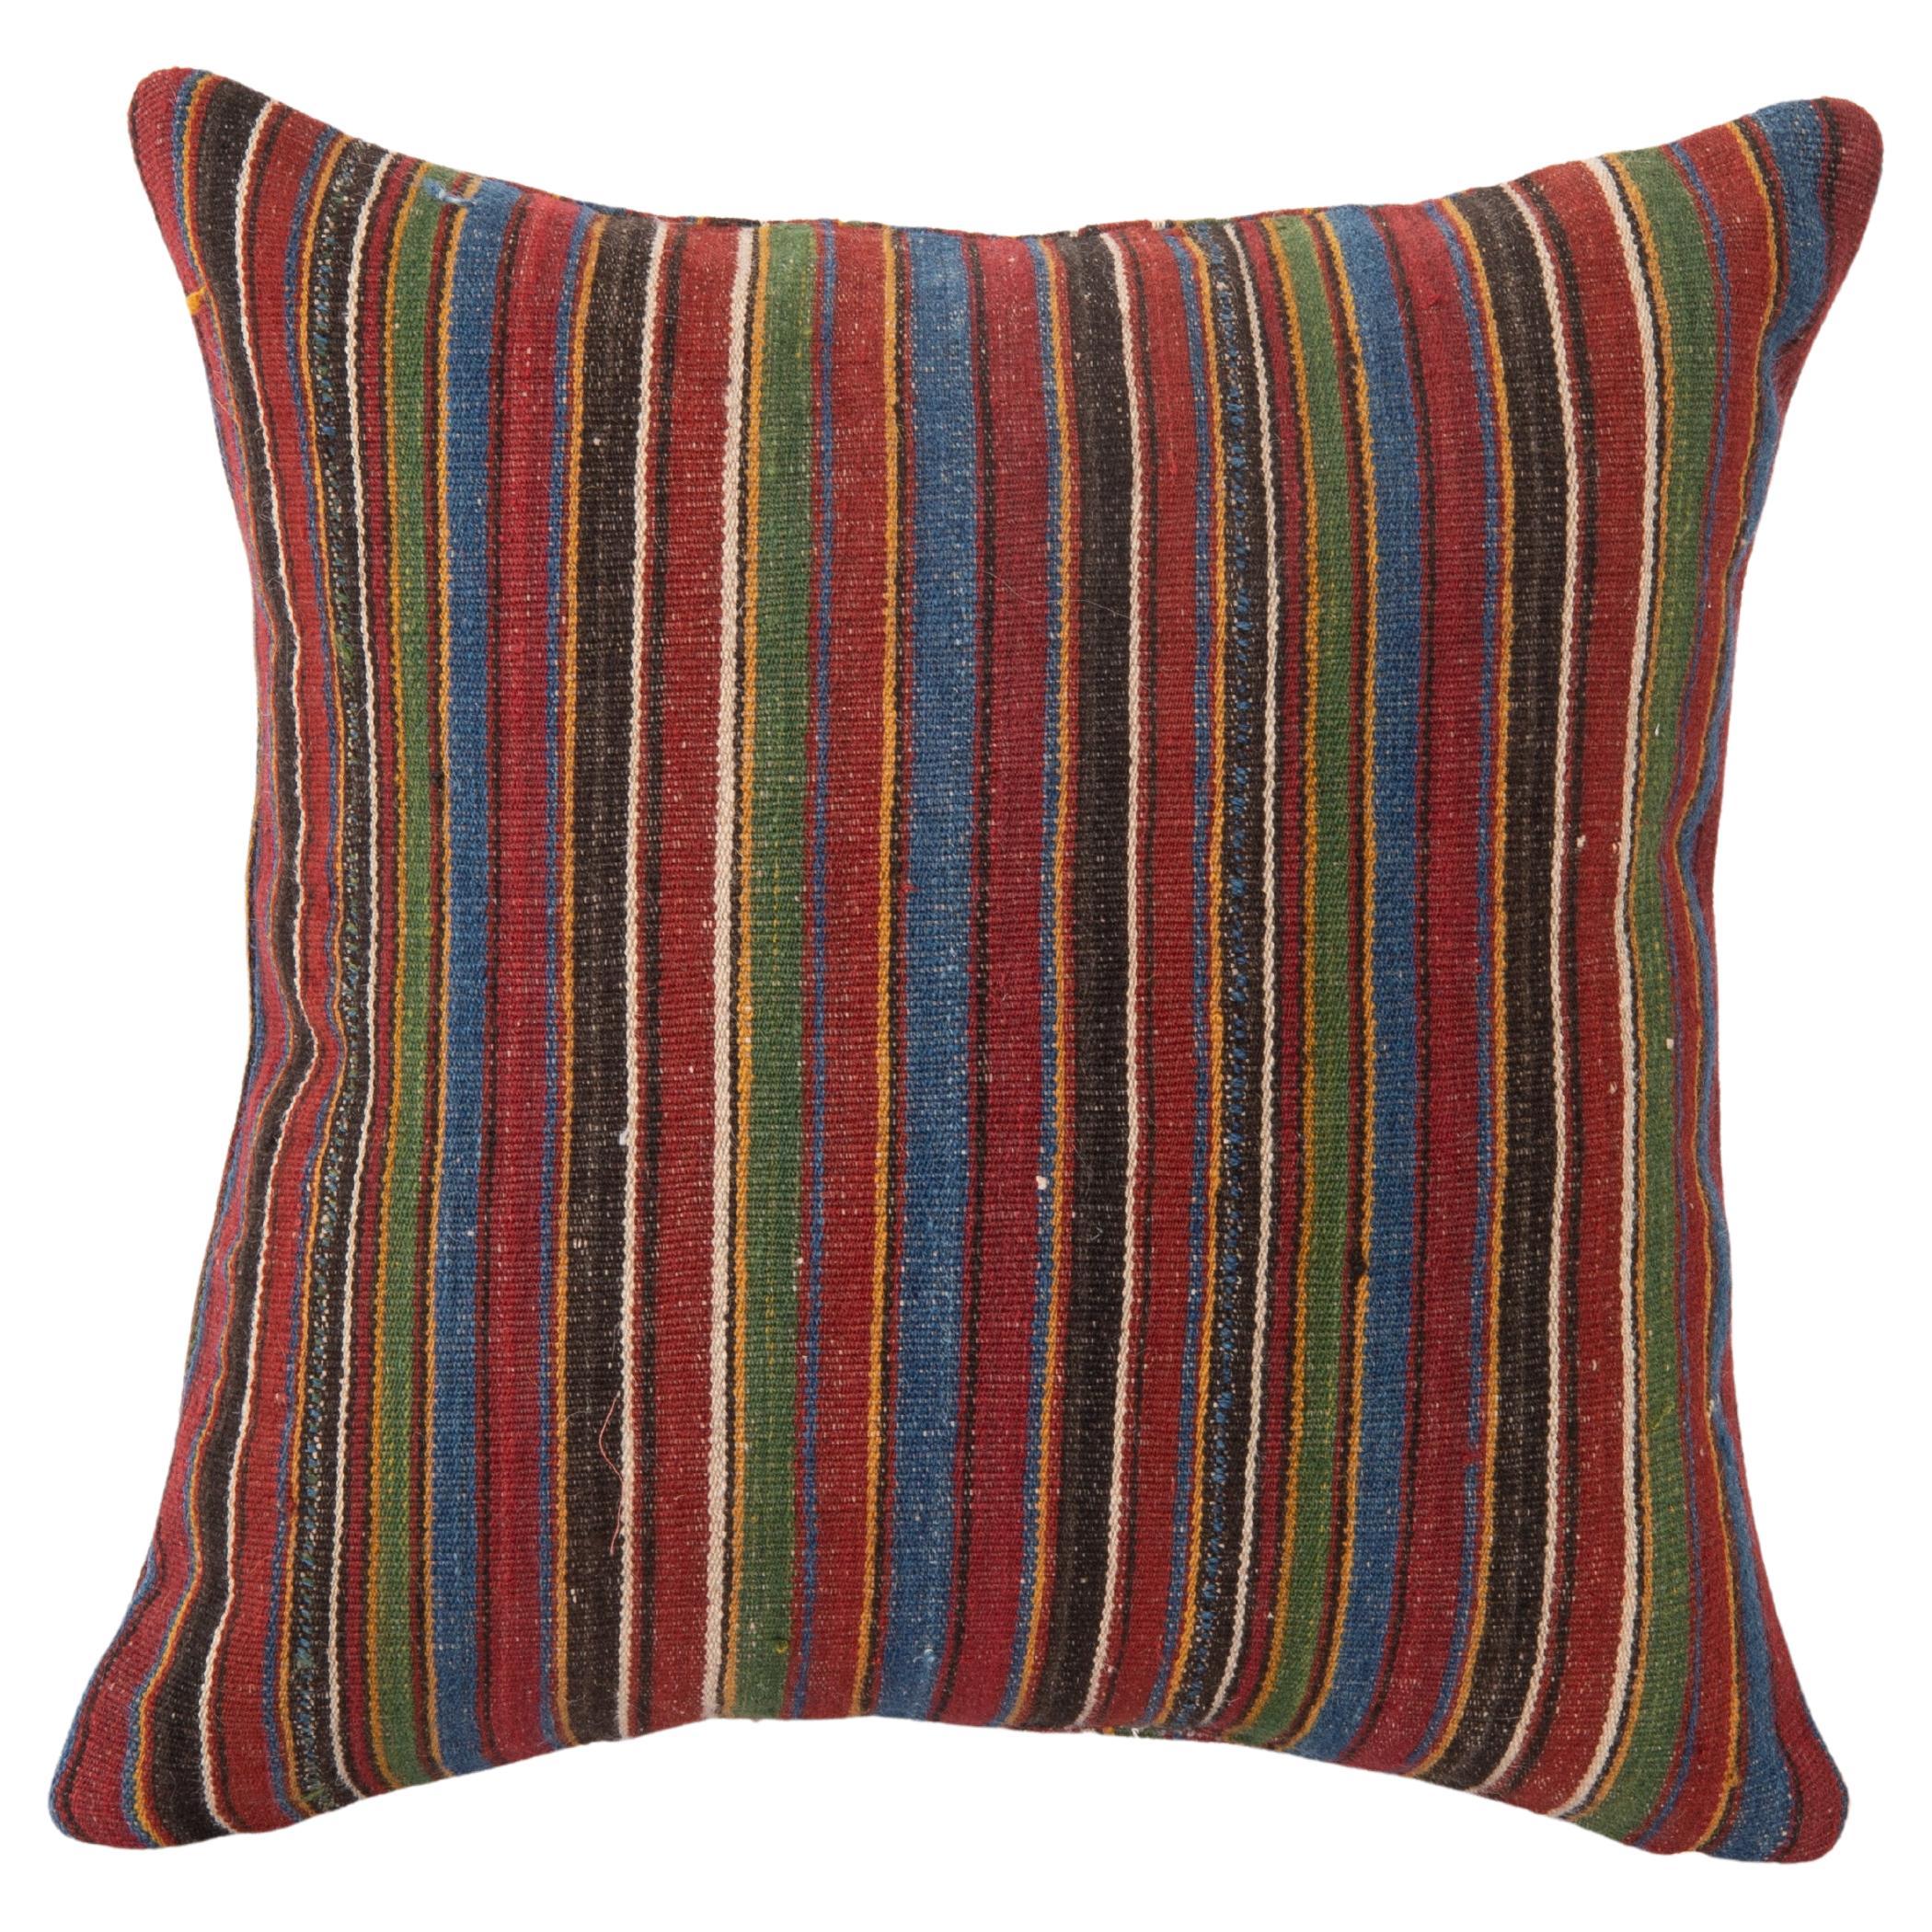 Double Sided Kilim Pillow Cover Made From an Antique Kilim For Sale